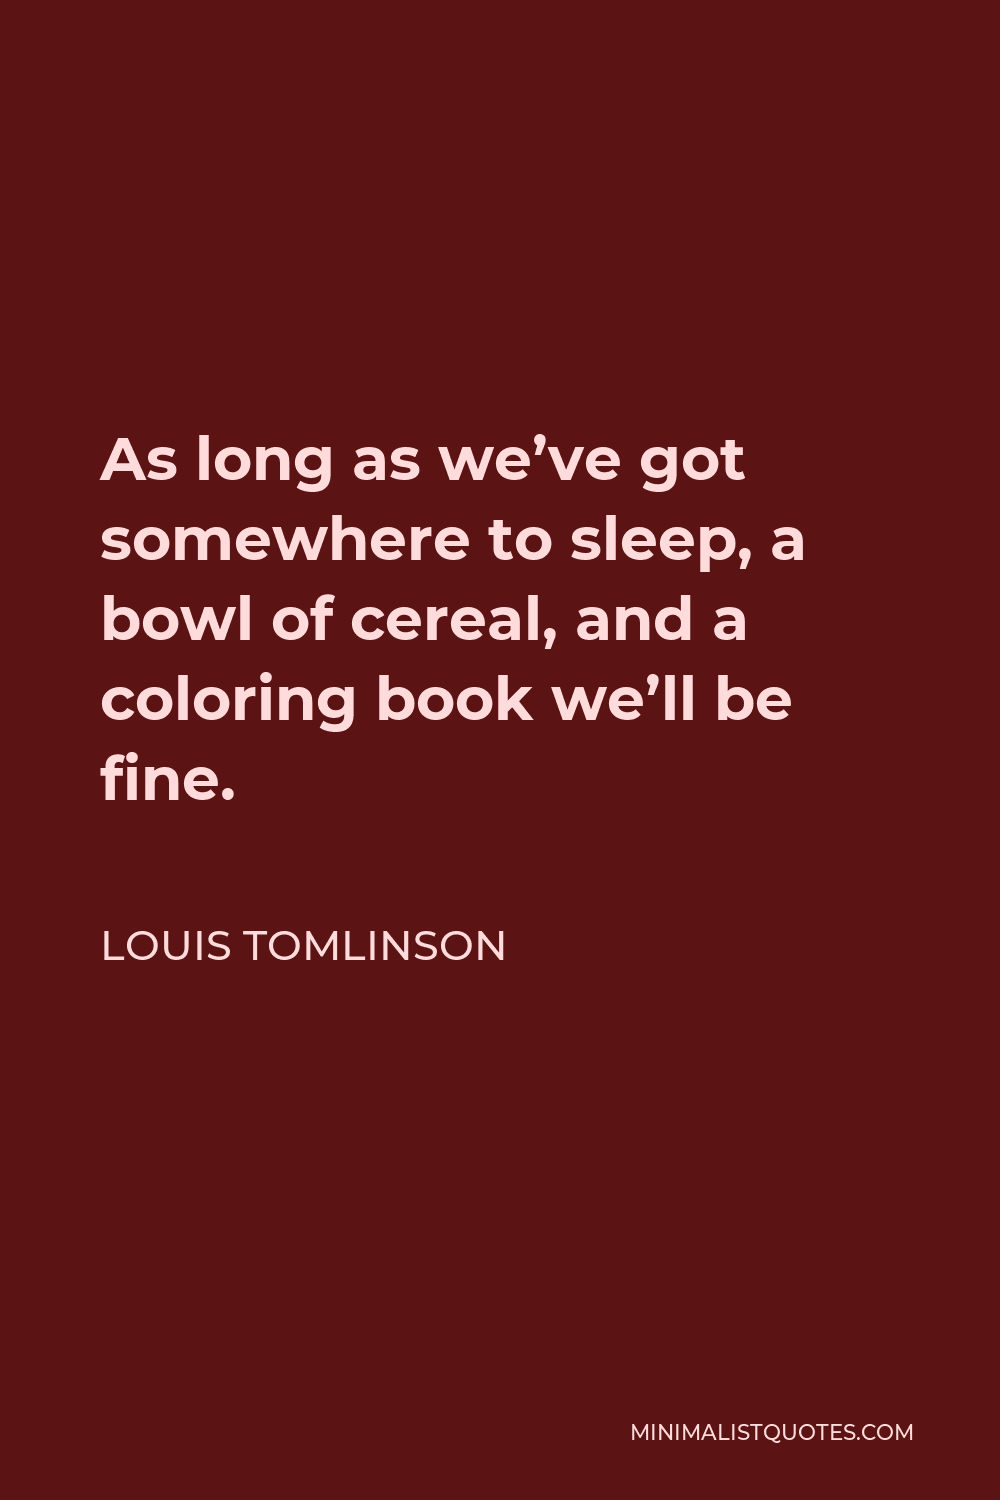 Louis Tomlinson Quote - As long as we’ve got somewhere to sleep, a bowl of cereal, and a coloring book we’ll be fine.